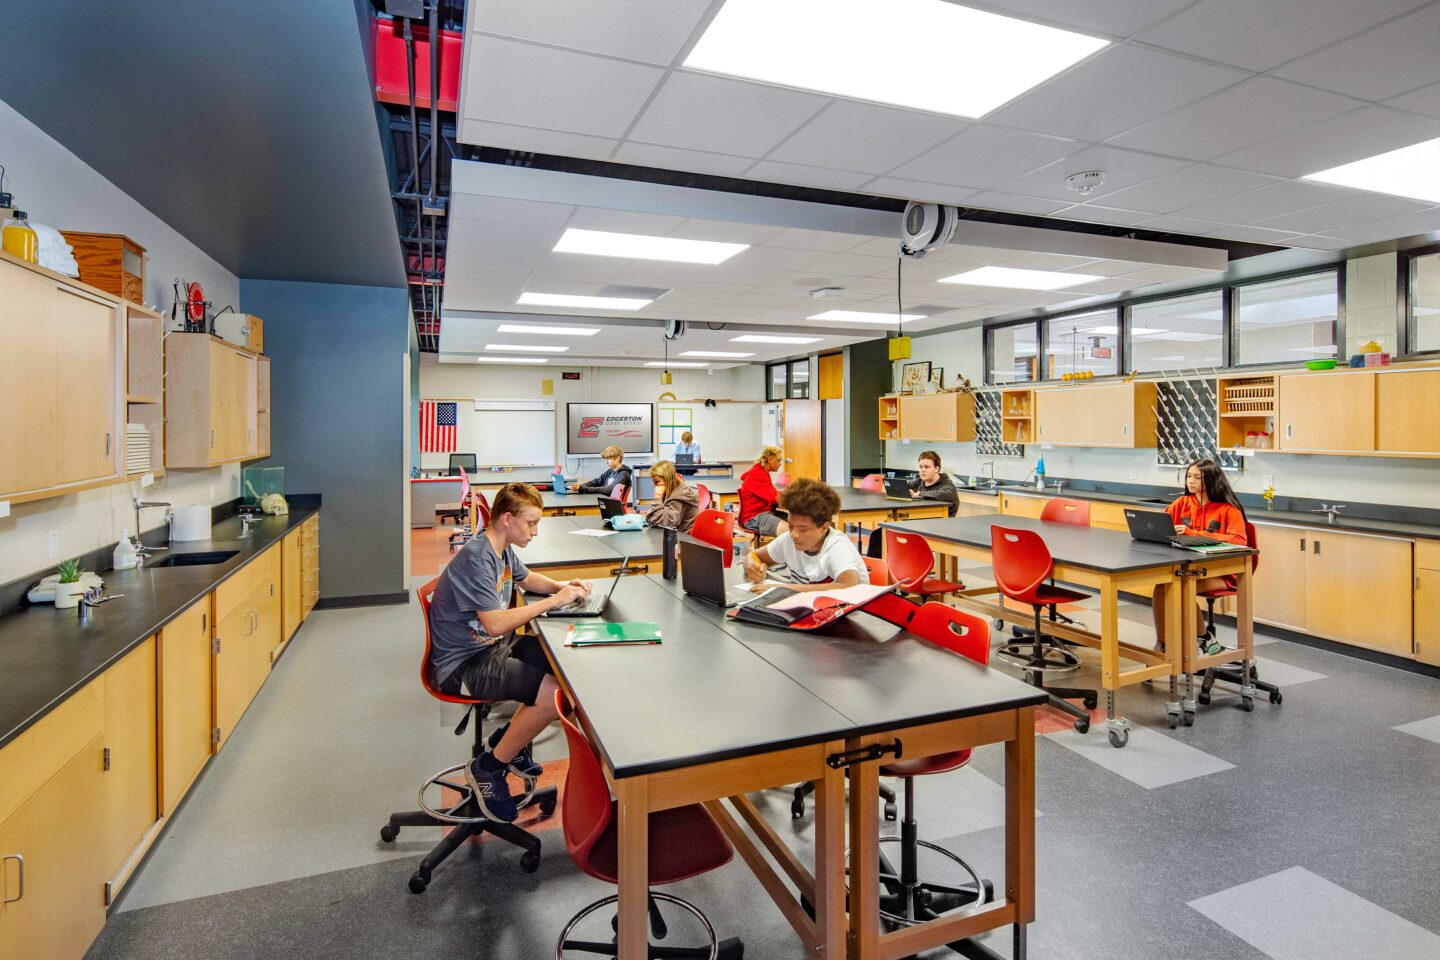 Edgerton High School Chemistry Room with students sitting at tables